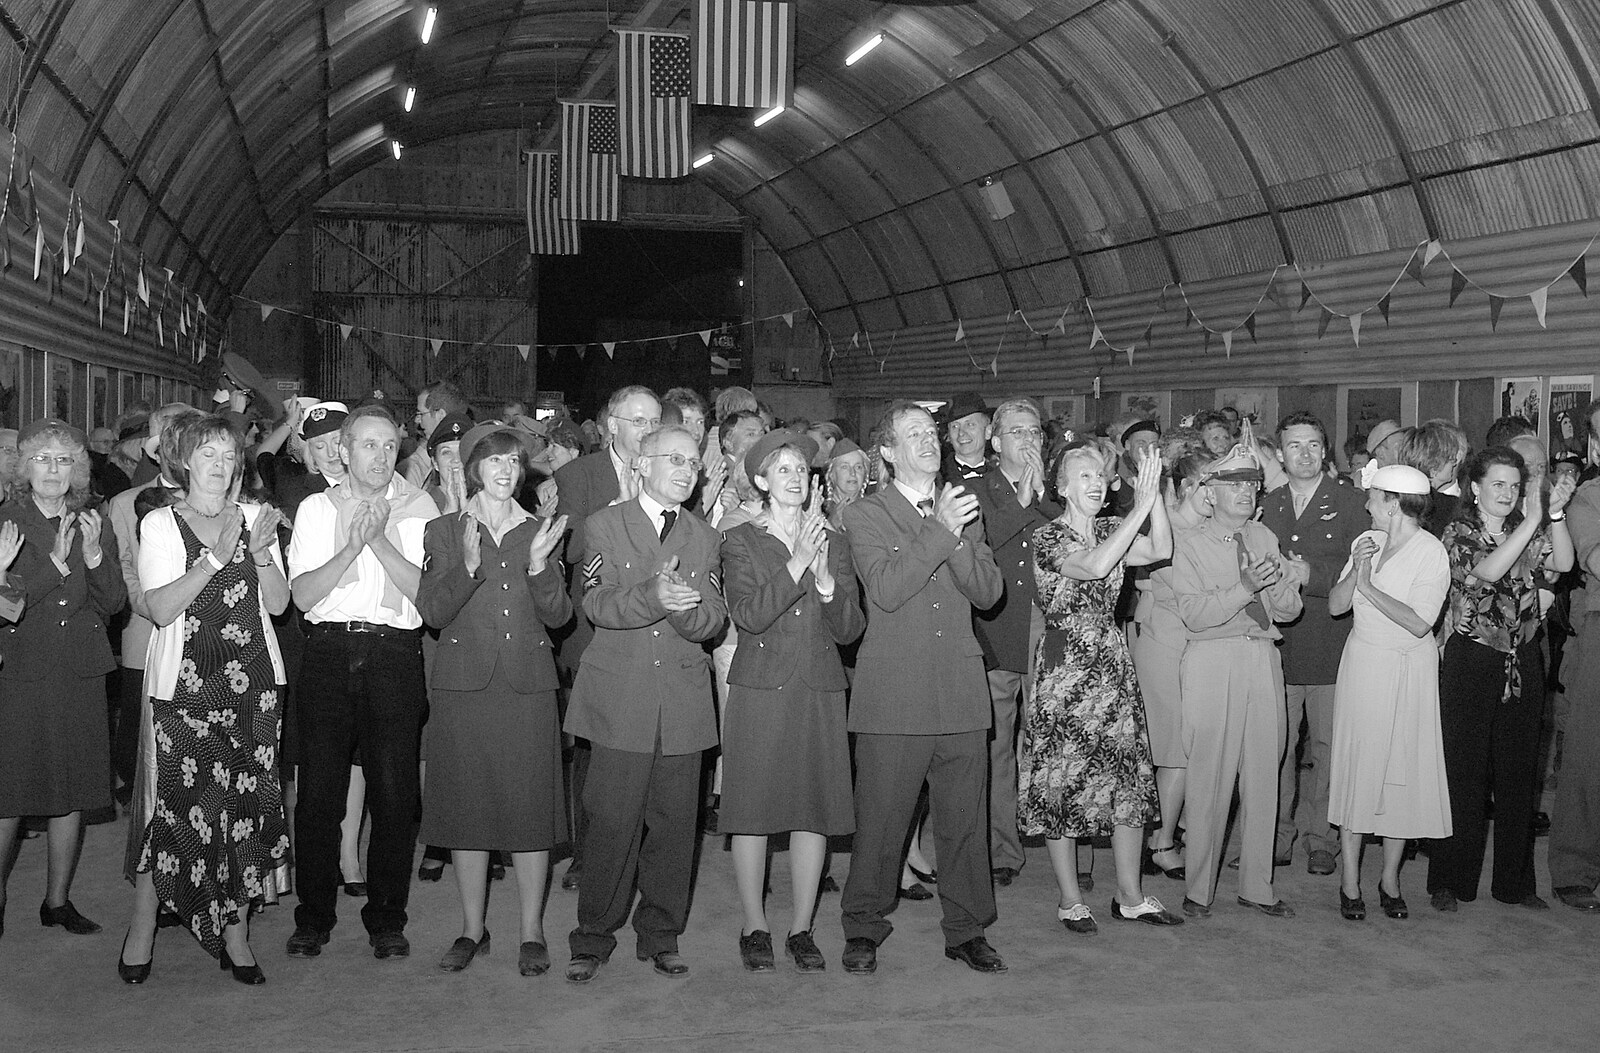 The crowd applaud the band from A 1940s VE Dance At Debach Airfield, Debach, Suffolk - 11th June 2005